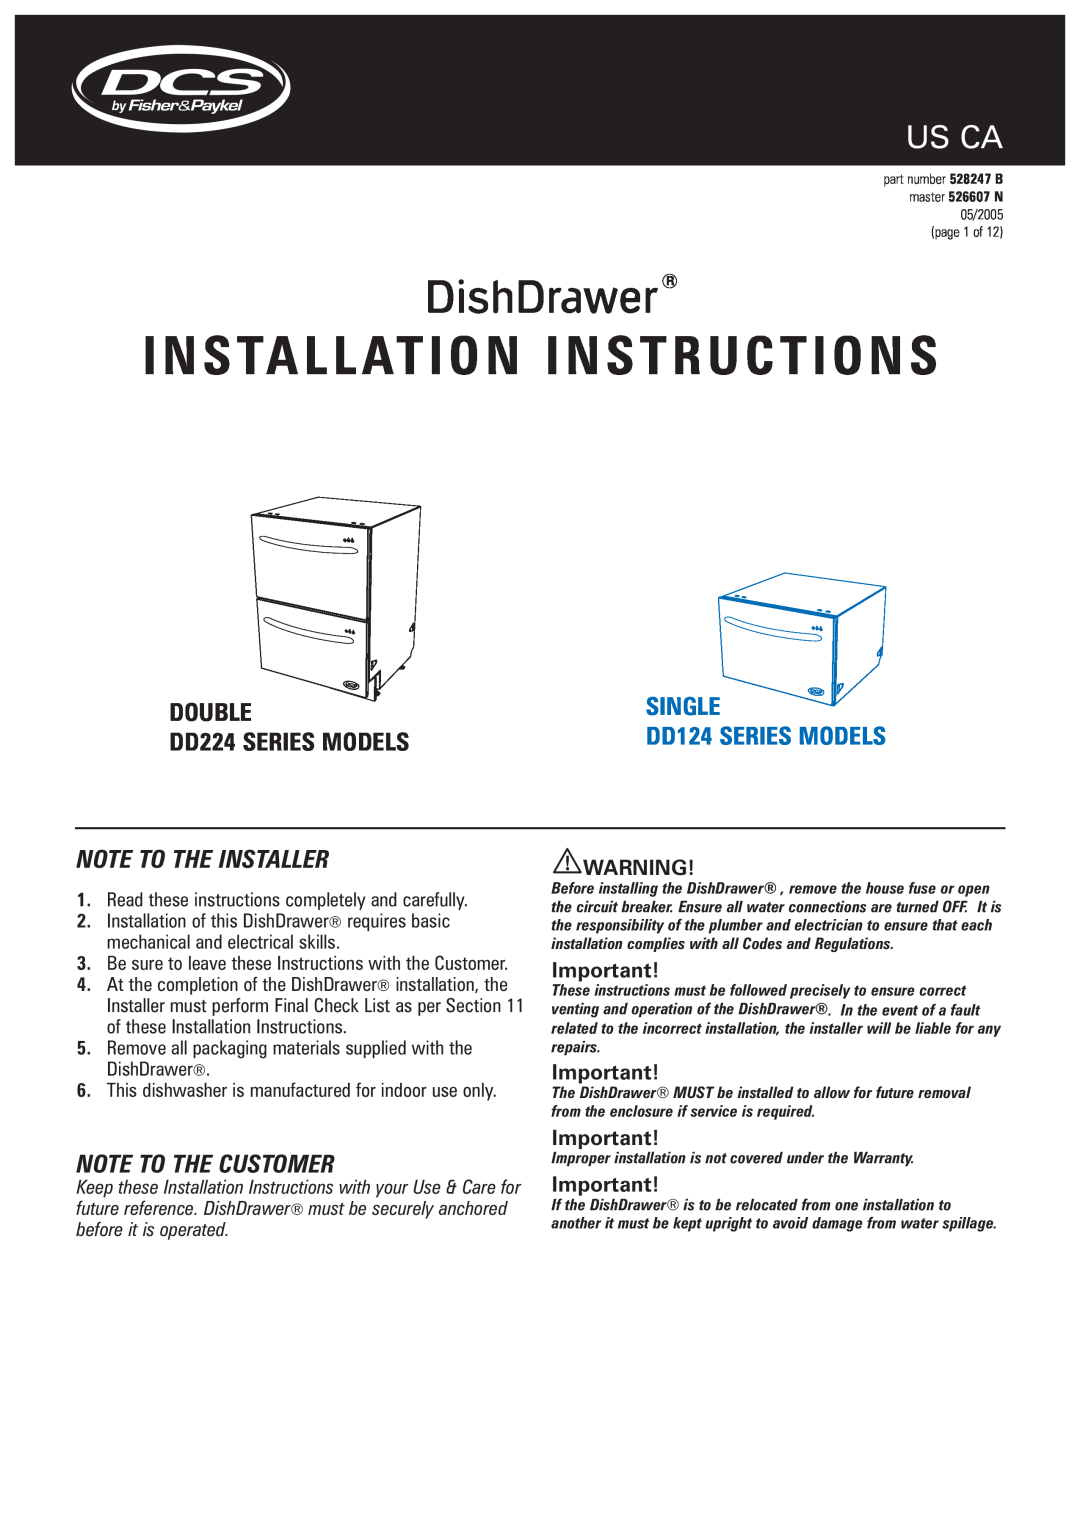 DCS DS224 installation instructions Note To The Installer, Note To The Customer, Installation Instructions, Us Ca, Double 